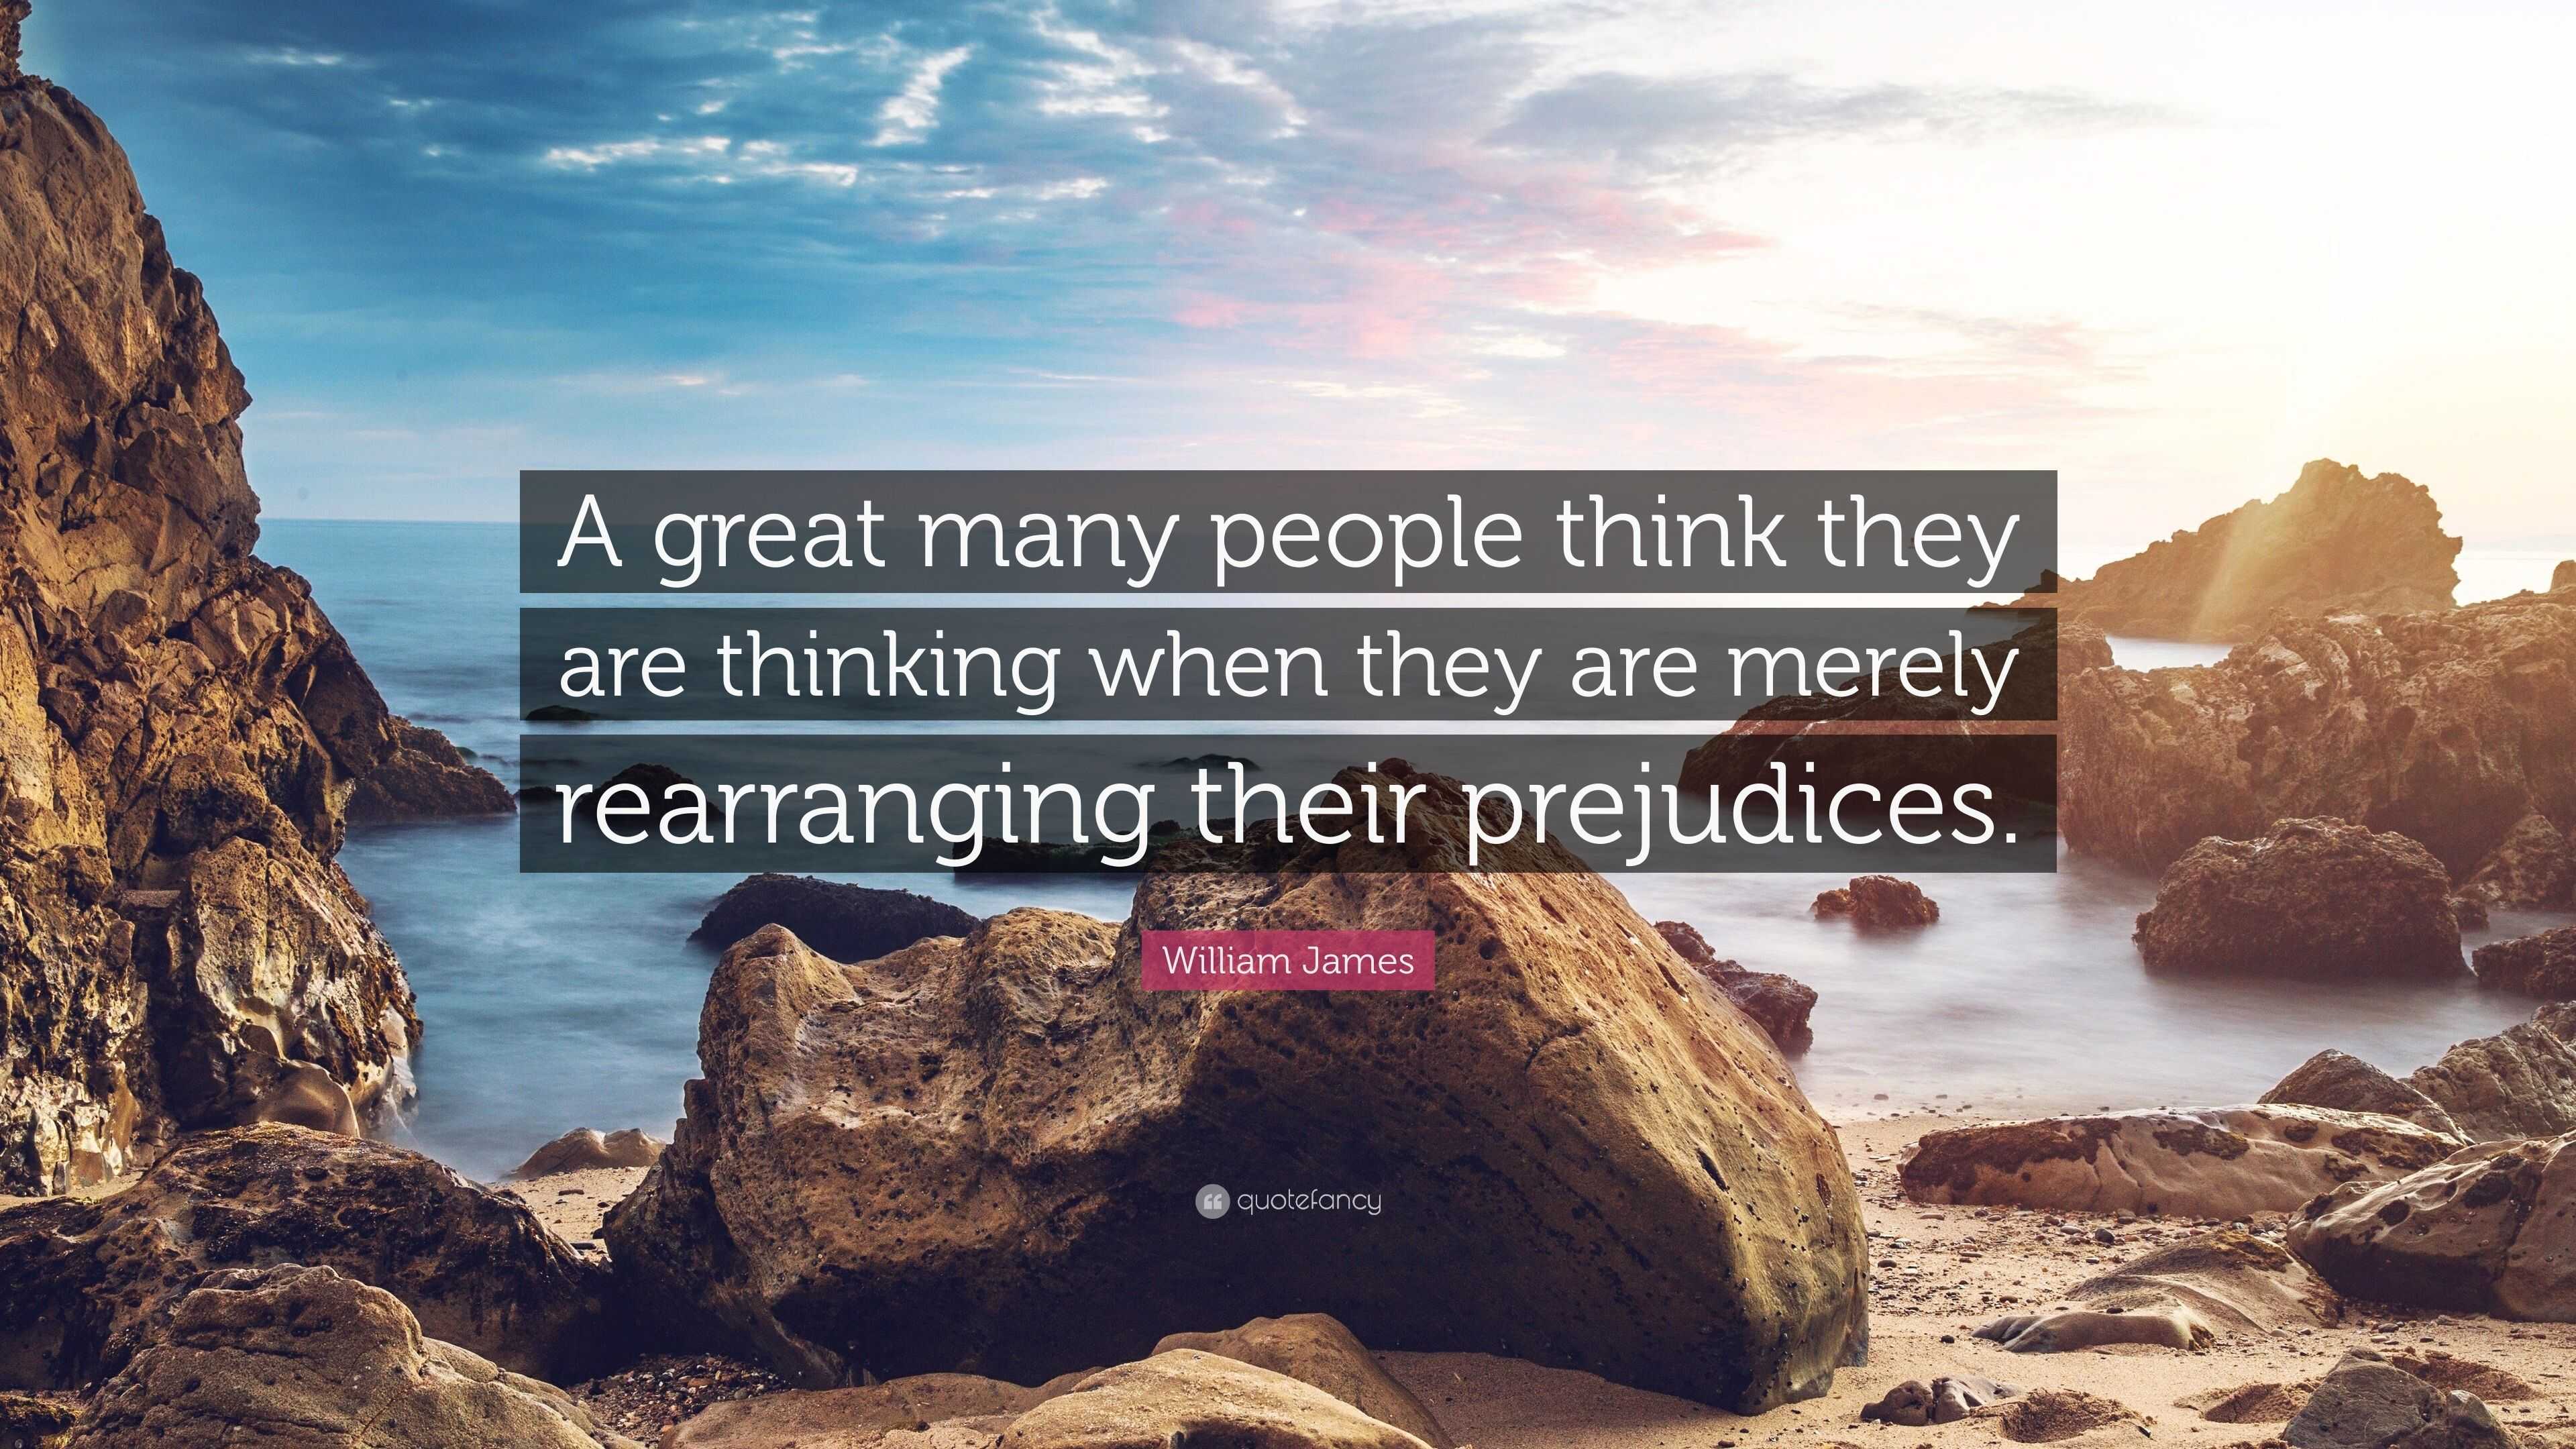 Deep meaning quotes | A great many people think they are thinking when they  are merely rearranging their prejudices - William James | Poster